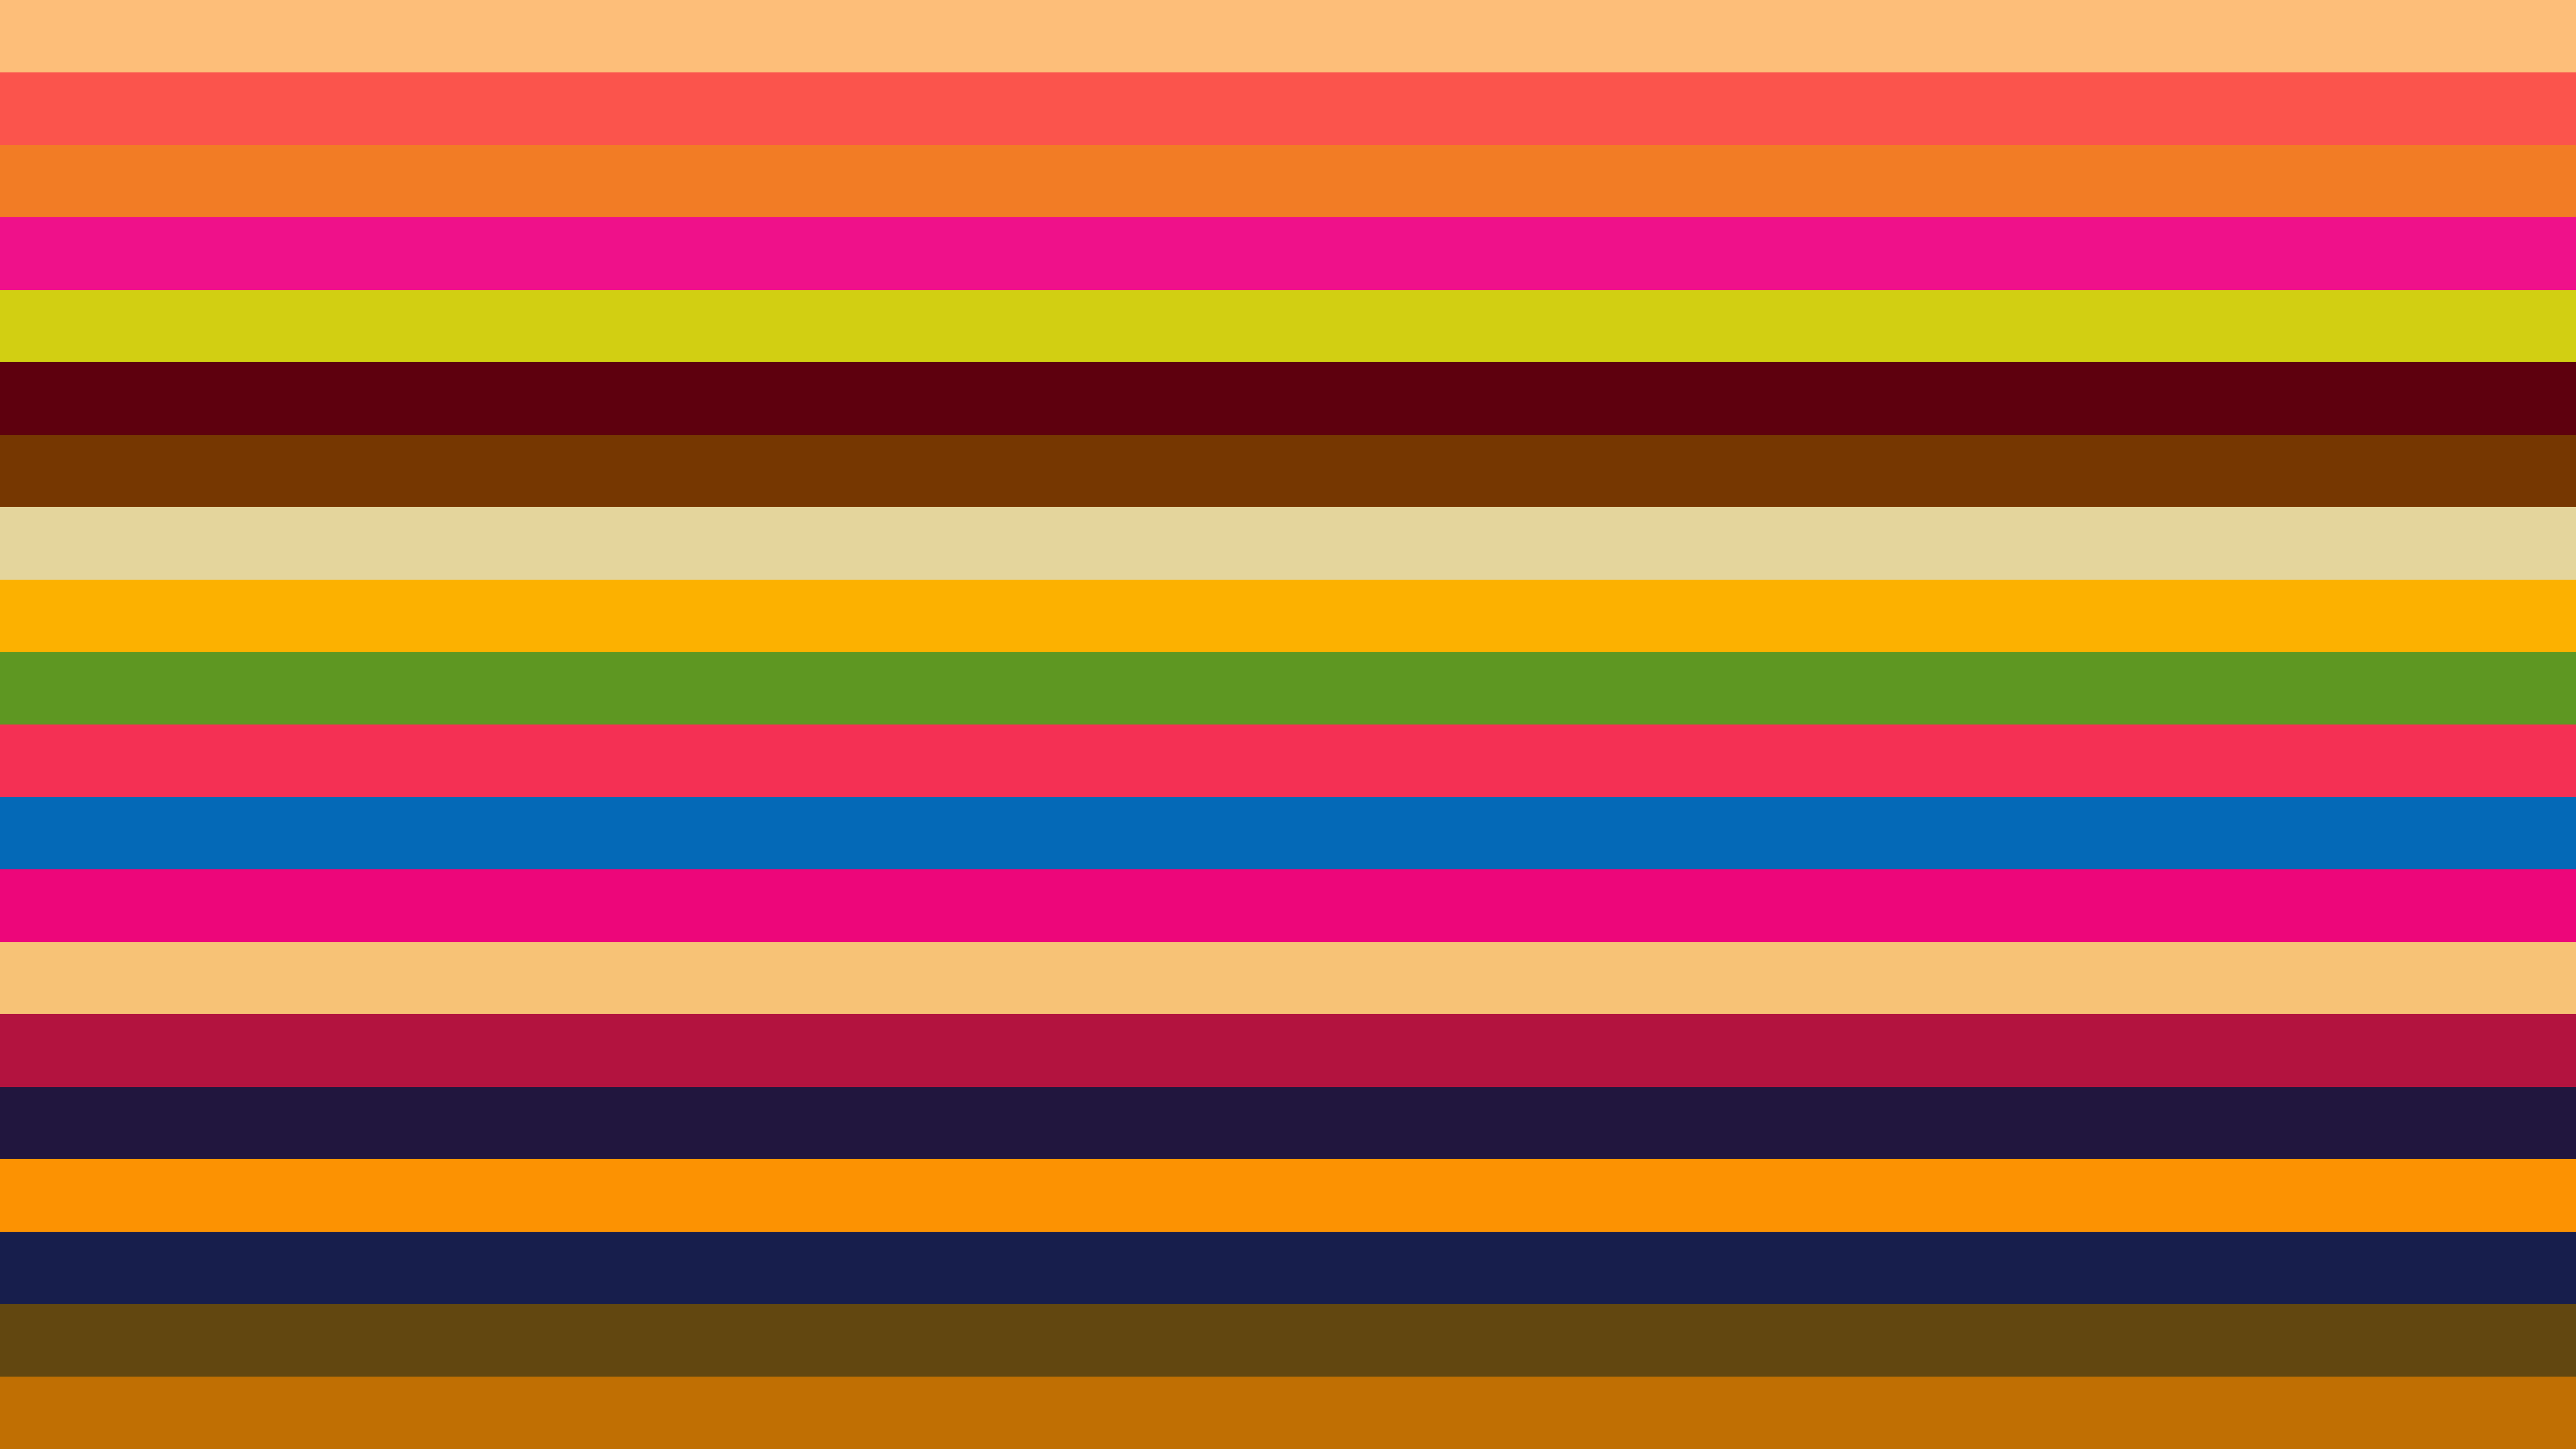 Free Colorful Horizontal Striped Background Vector